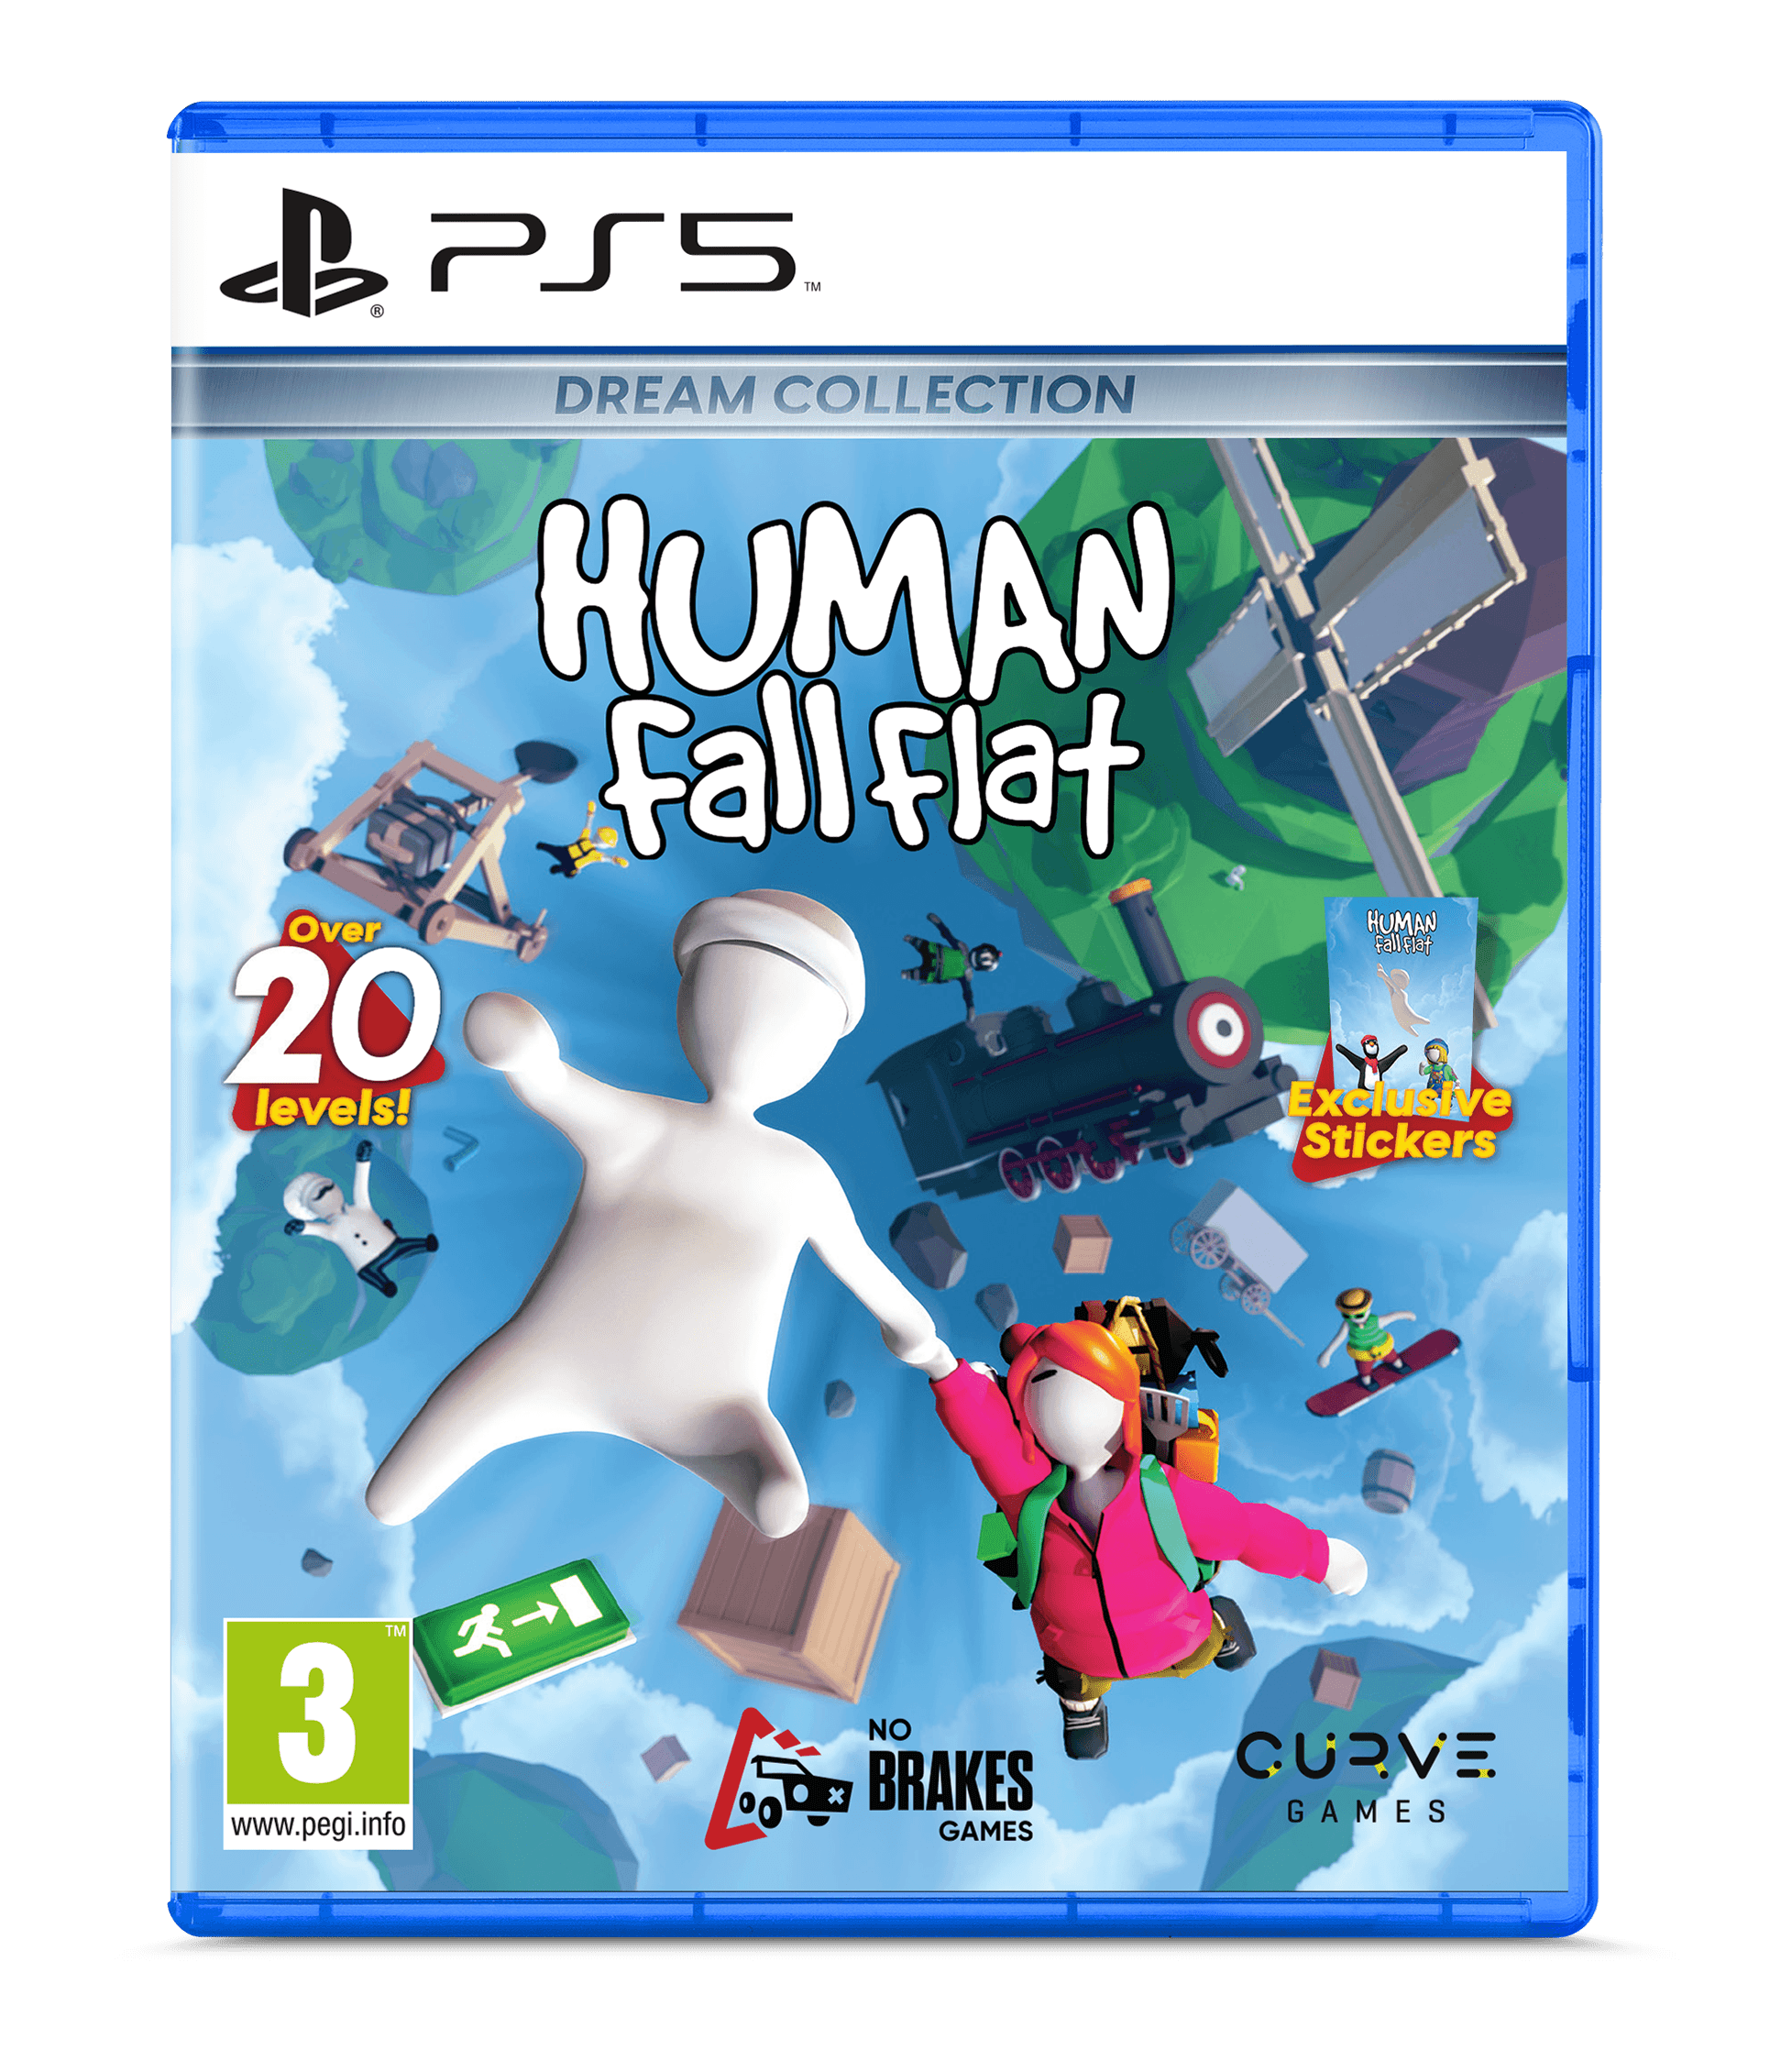 Human Fall Flat: Dream Collection - Want a New Gadget